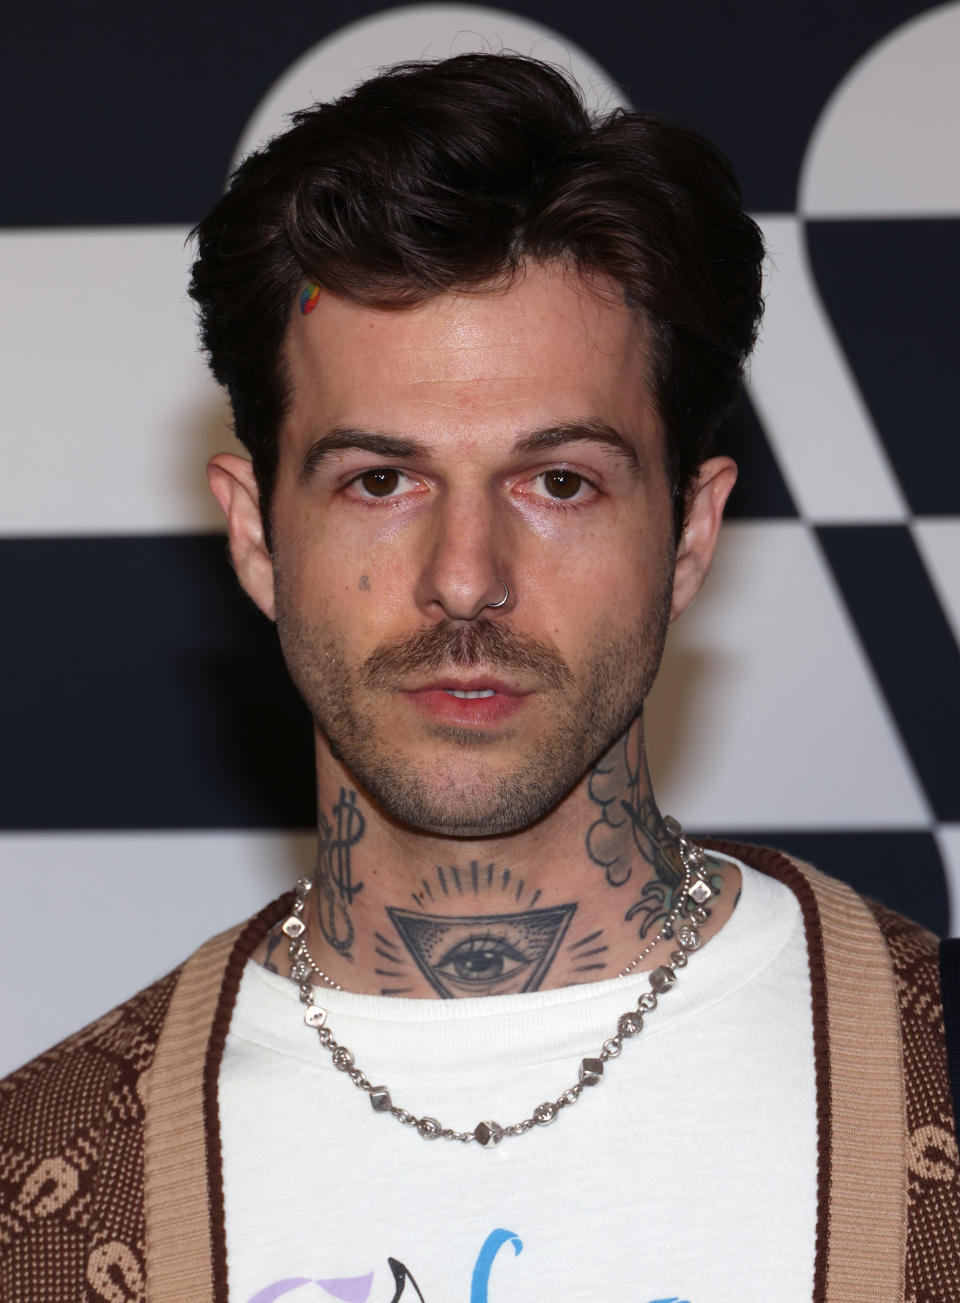 Jesse Rutherford has been under scrutiny ever since his relationship with Billie Eilish was first made public last October, but things reached new levels in August. The 11-year age gap between the two stars coupled with Billie being a huge fan of Jesse’s for years before they met sparked discourse about a problematic power dynamic between them.They met for the first time when Billie was just 16 years old, but she was 20 and he was 31 when they started dating. Amid the backlash, the two stars leaned into the criticism around their age gap by dressing up as a baby and an old man for Halloween last year, and when their split was confirmed in May, Billie’s rep insisted that things were “amicable.”But three months later, Jesse horrified people when he appeared to make “disrespectful” and “disturbing” references to Billie in his new song “POV.”In the track, Jesse sings: “She's been listening to me since 2013 / I know she's got daddy issues, welcome to the family.”  While Billie has an incredibly close relationship with both of her parents, some believe that Jesse's reference to 